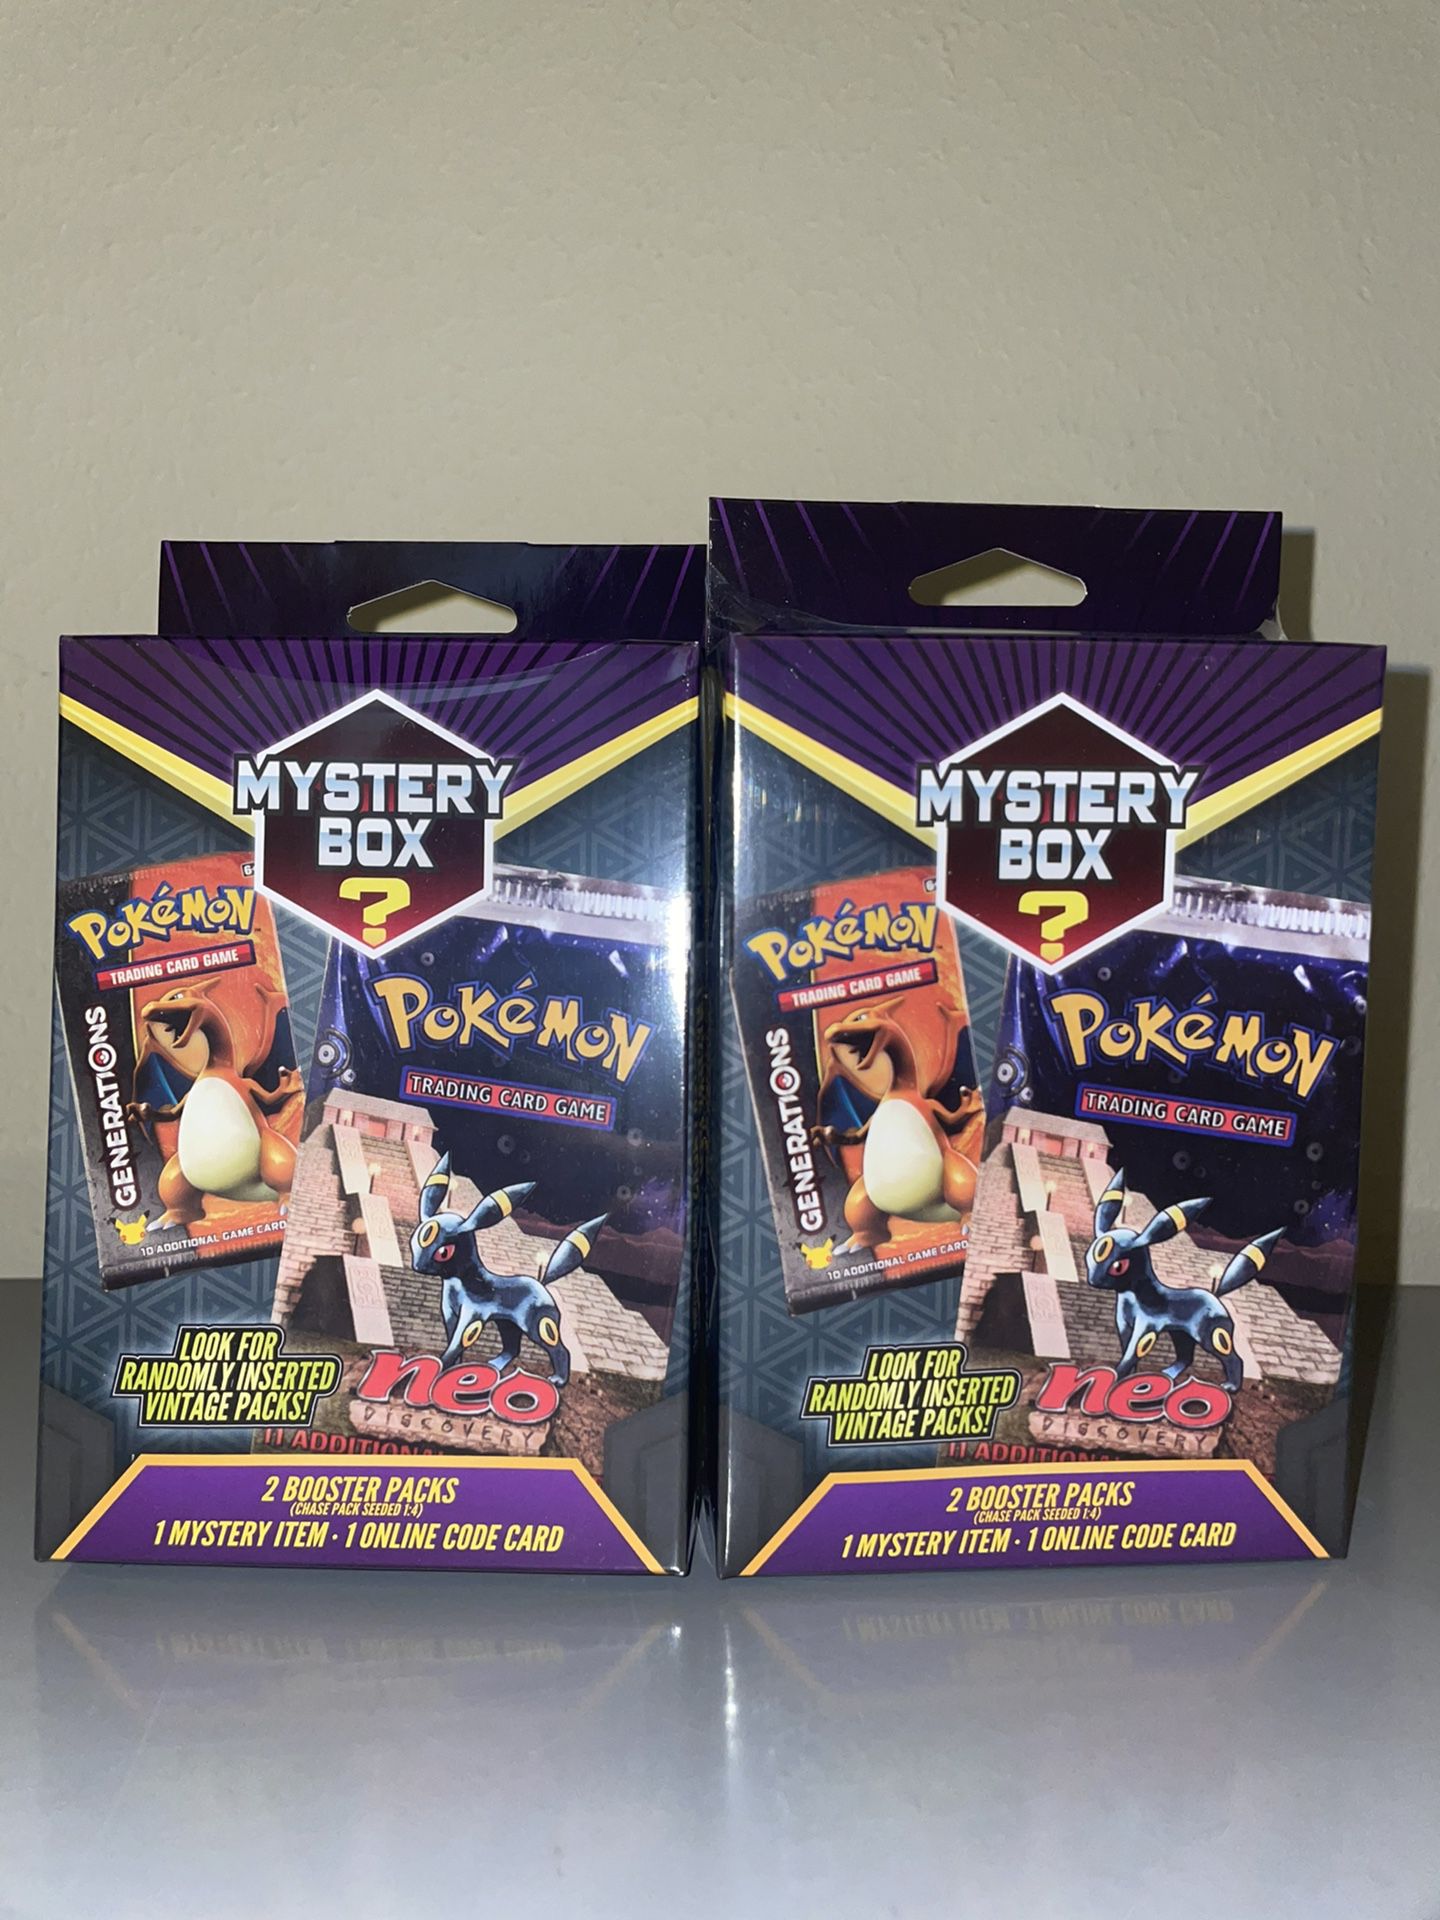 Pokemon Walmart Exclusive Mystery Hanger Box Vintage Packs Seeded 1:4! Factory Sealed